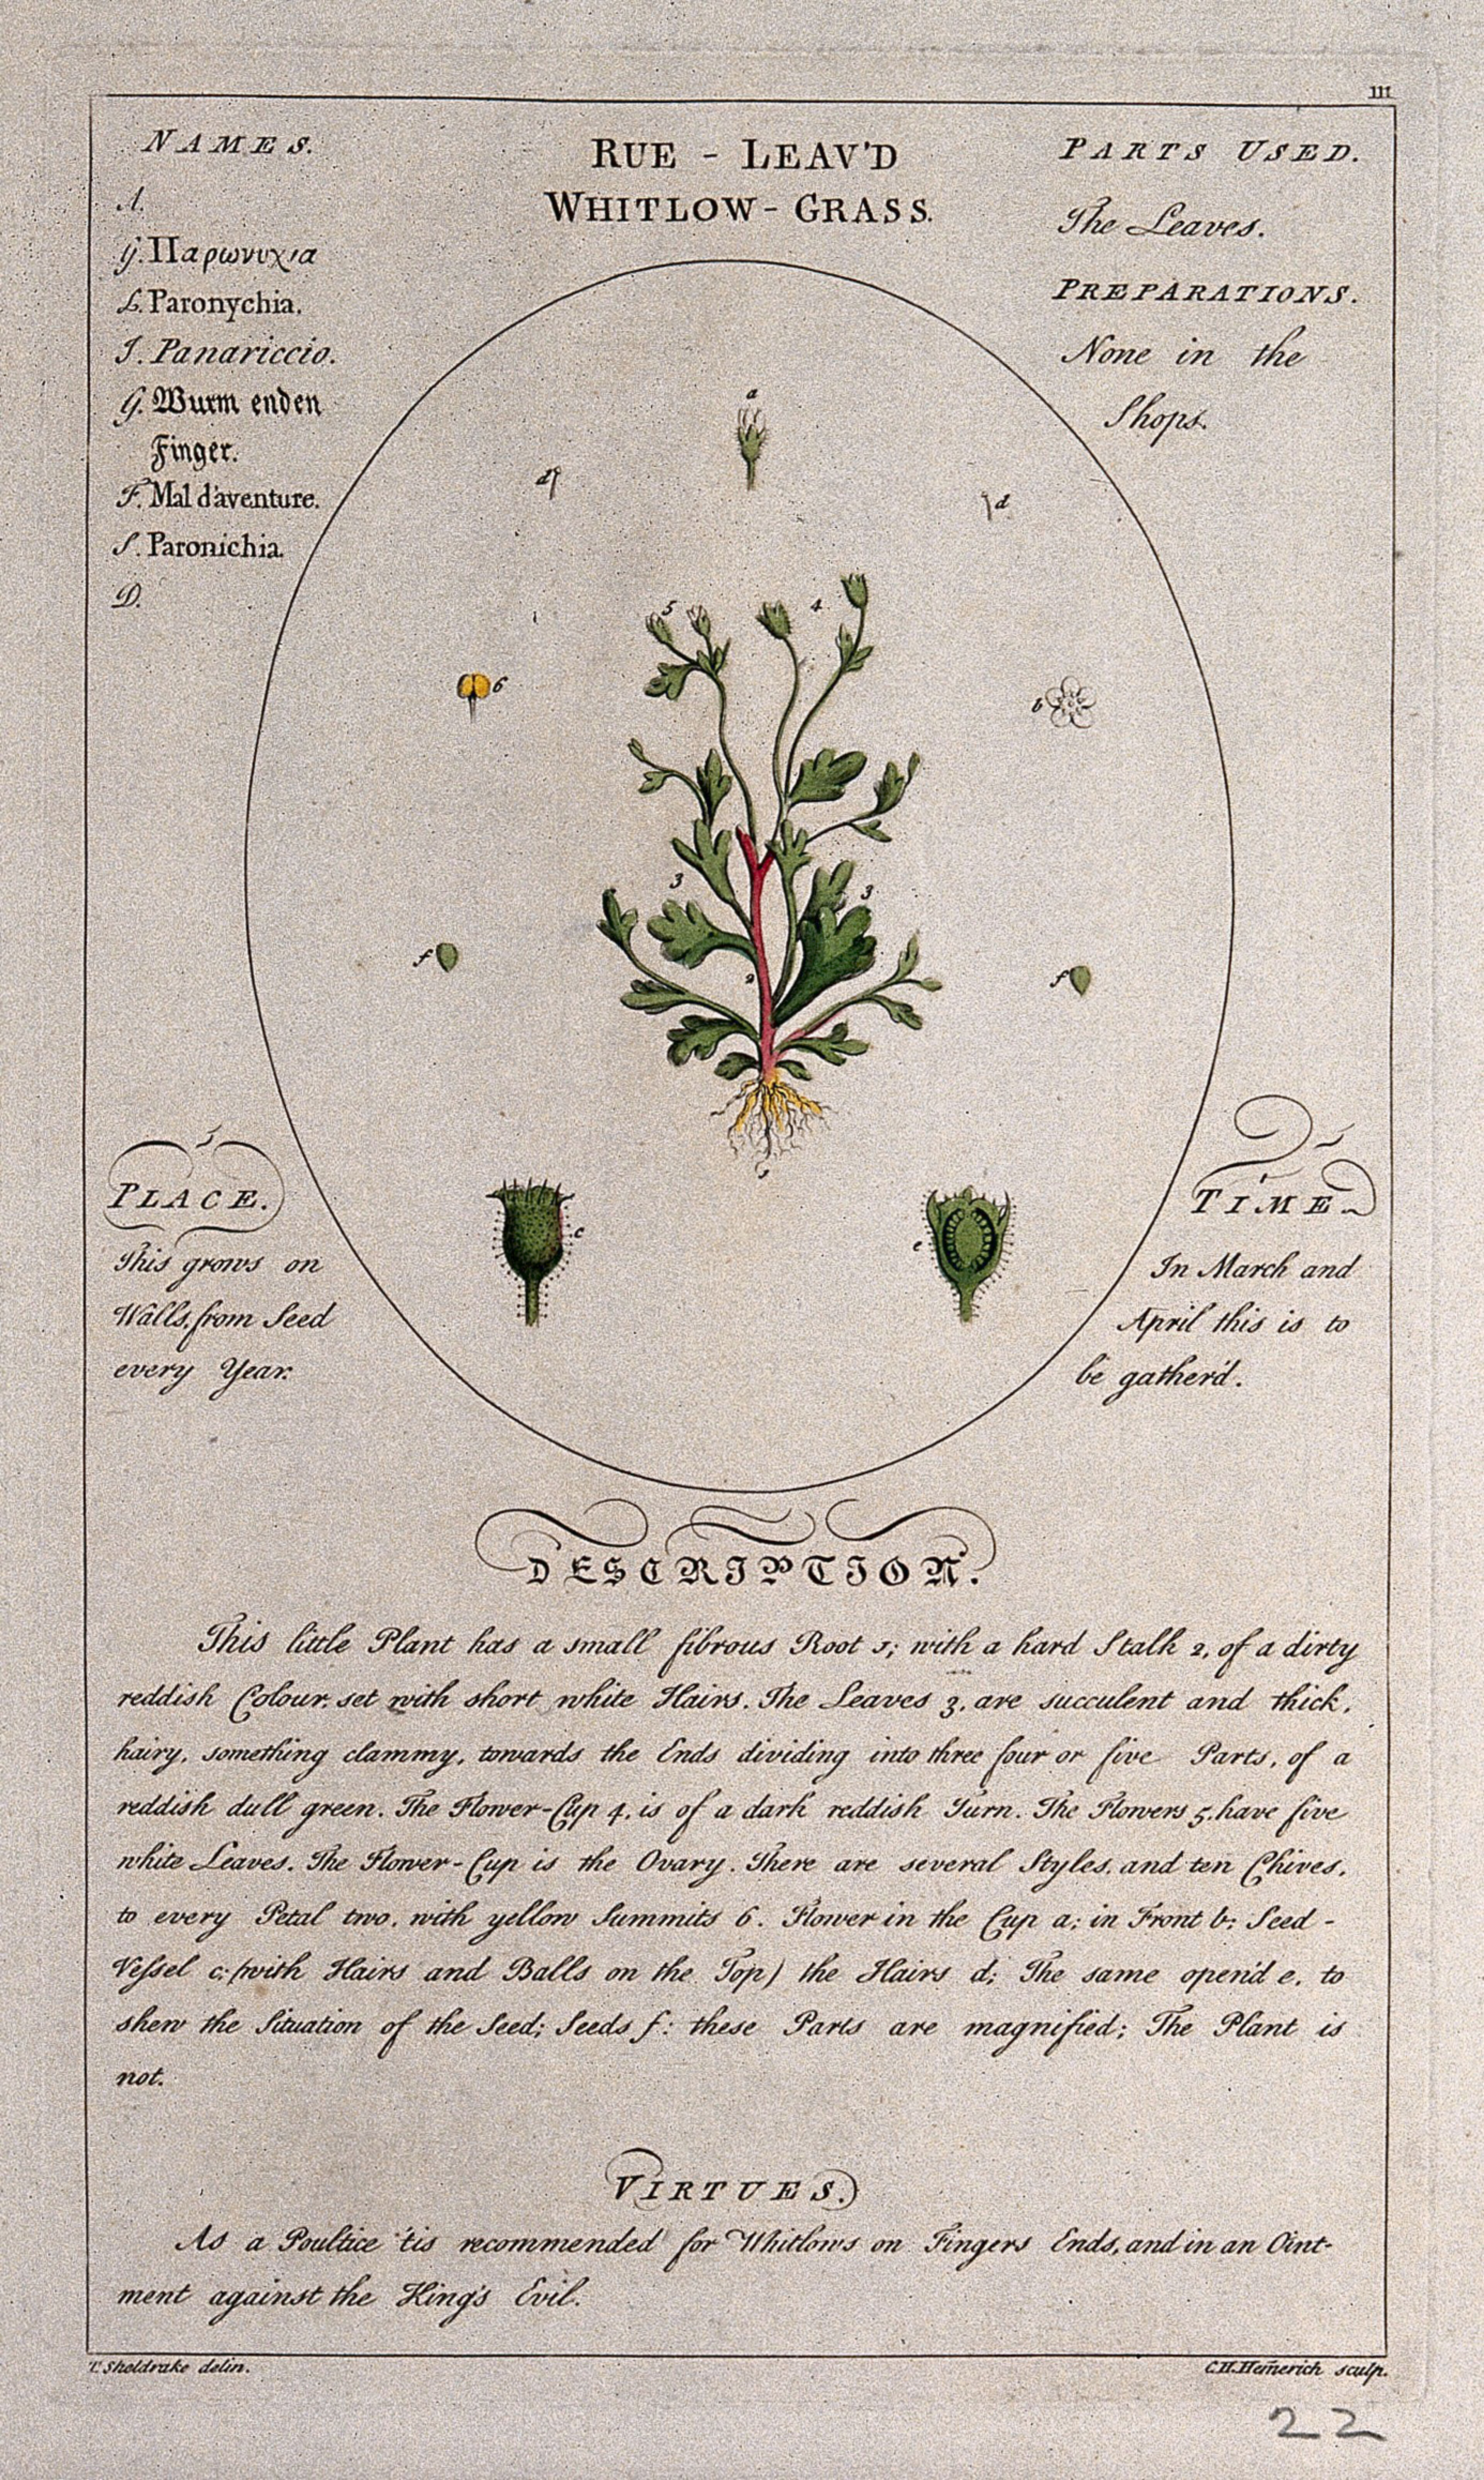 Rue-leaved whitlow grass (Paronychia serpyllifolia DC.): entire flowering plant with separate floral segments and a description of the plant and its uses. Coloured line engraving by C.H. Hemerich, c.1759, after T.Sheldrake.